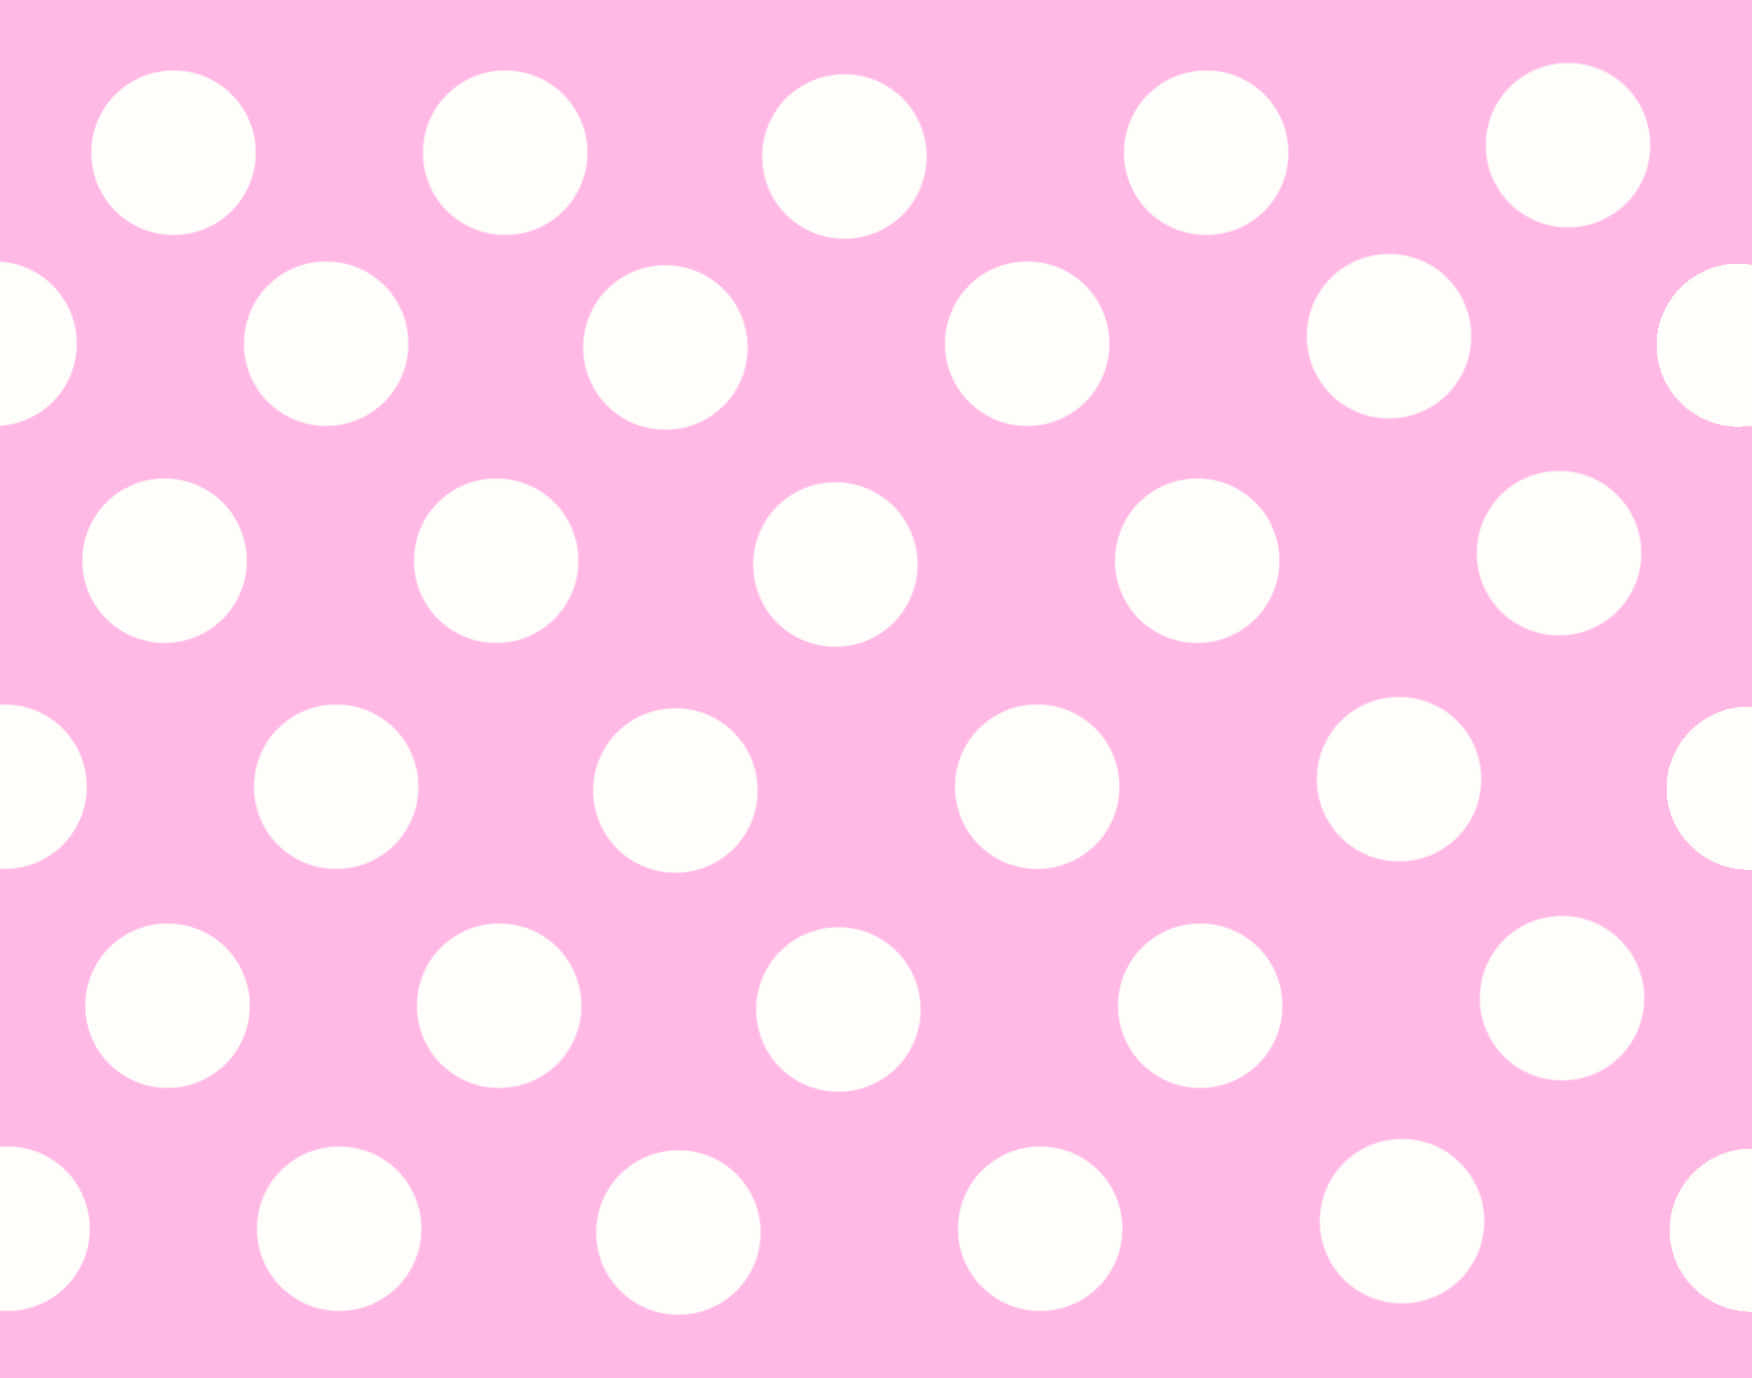 A Fun and Lighthearted Pink Polka Dot Background